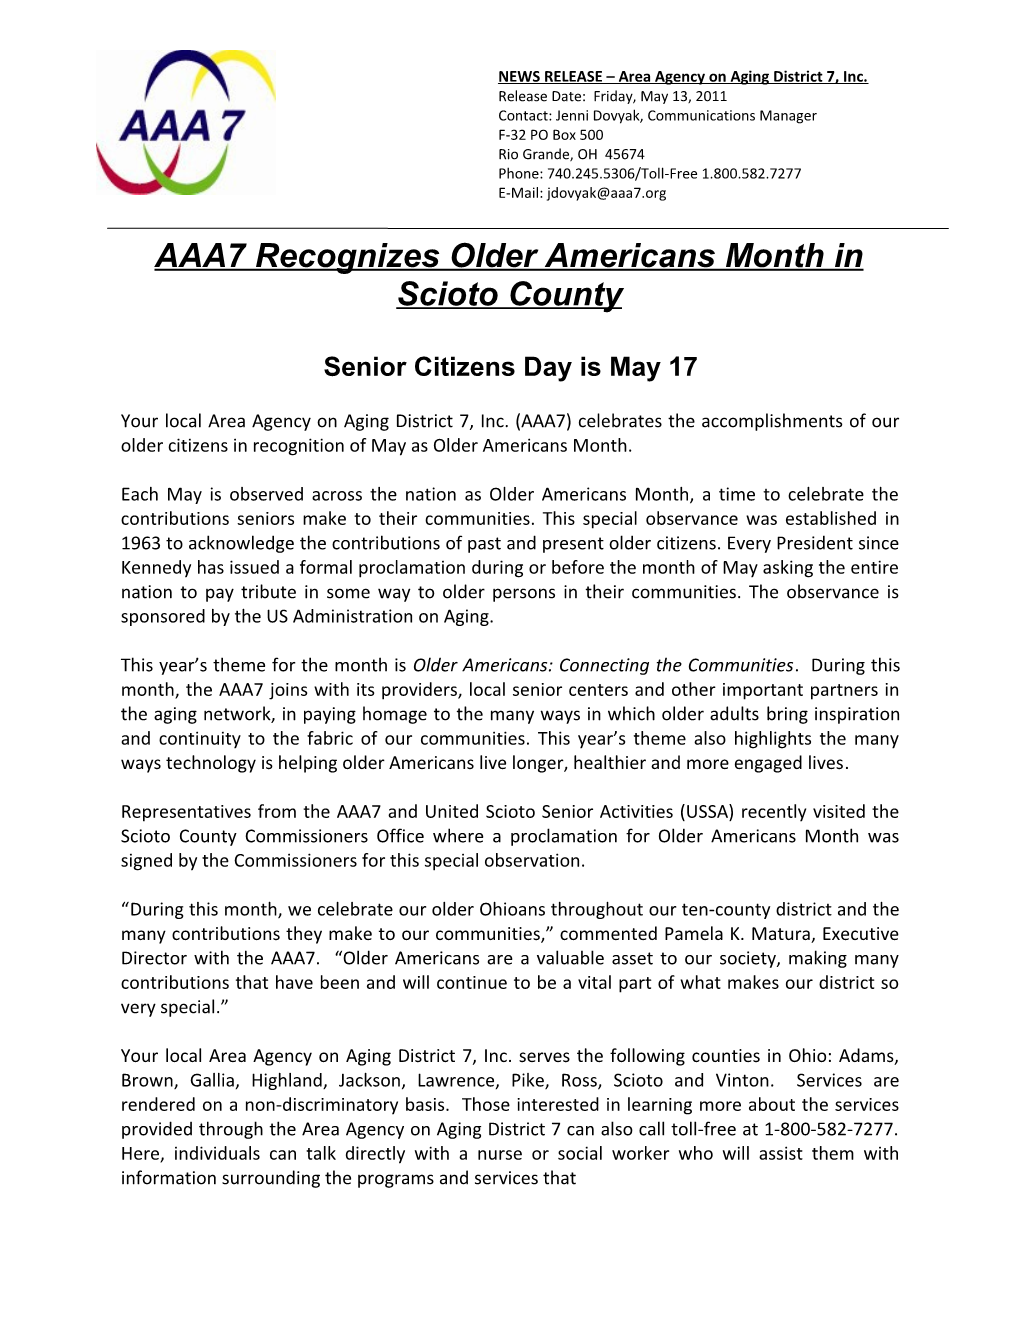 Senior Citizens Day Is May 17